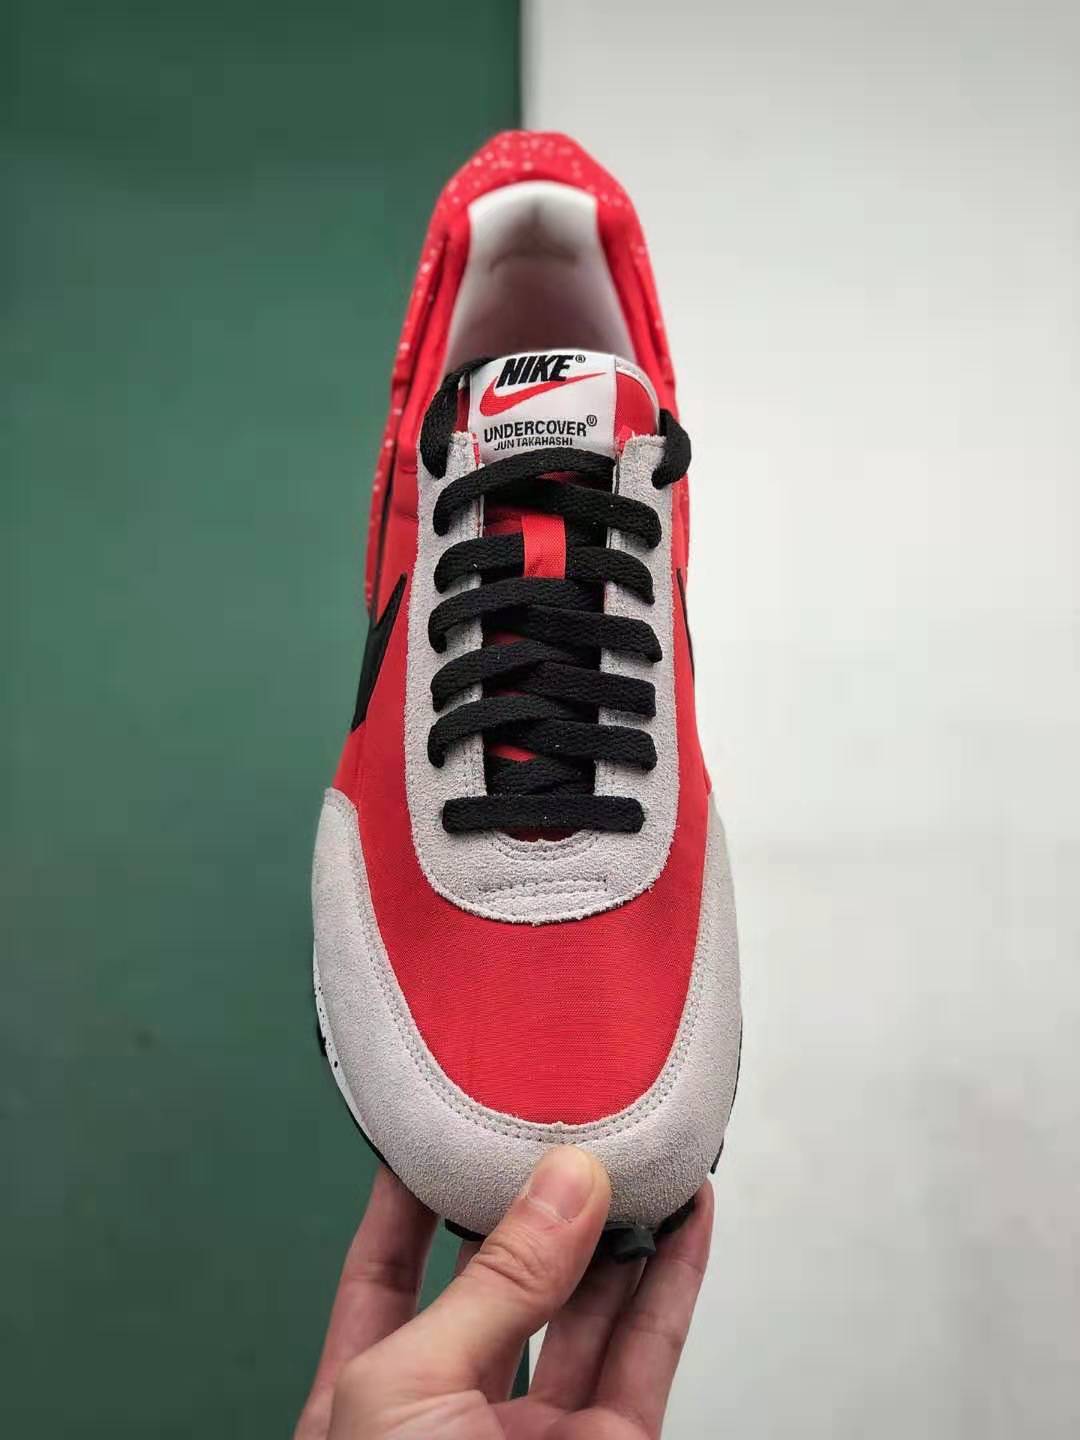 Undercover x Nike Waffle Racer Red Black White AA6853 106 - Limited Edition Sneakers for Sale